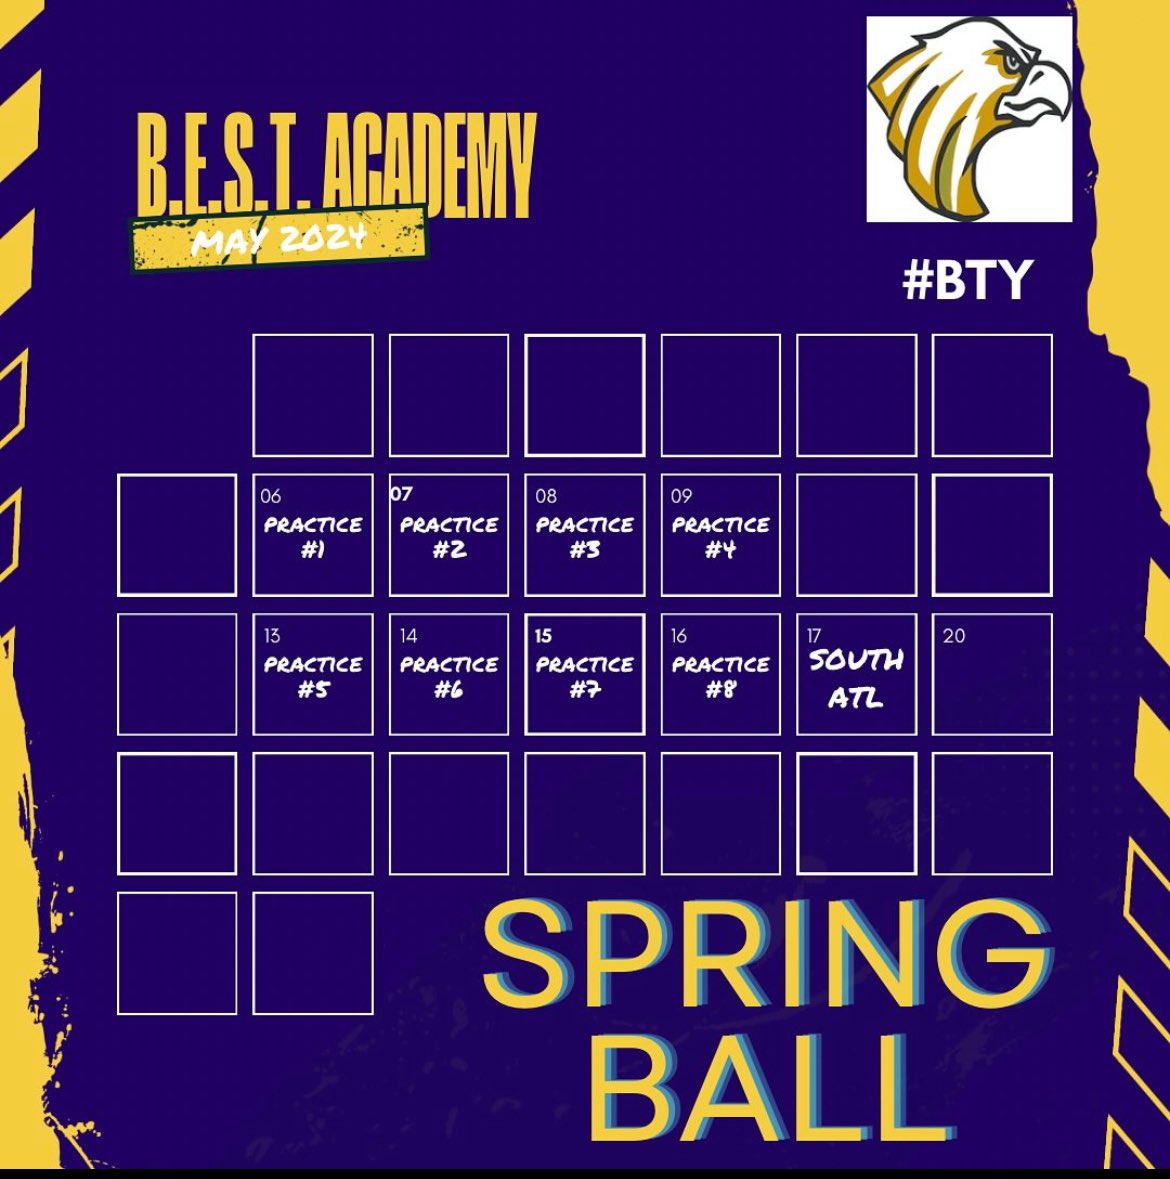 Come check us out this spring #BTY 🦅